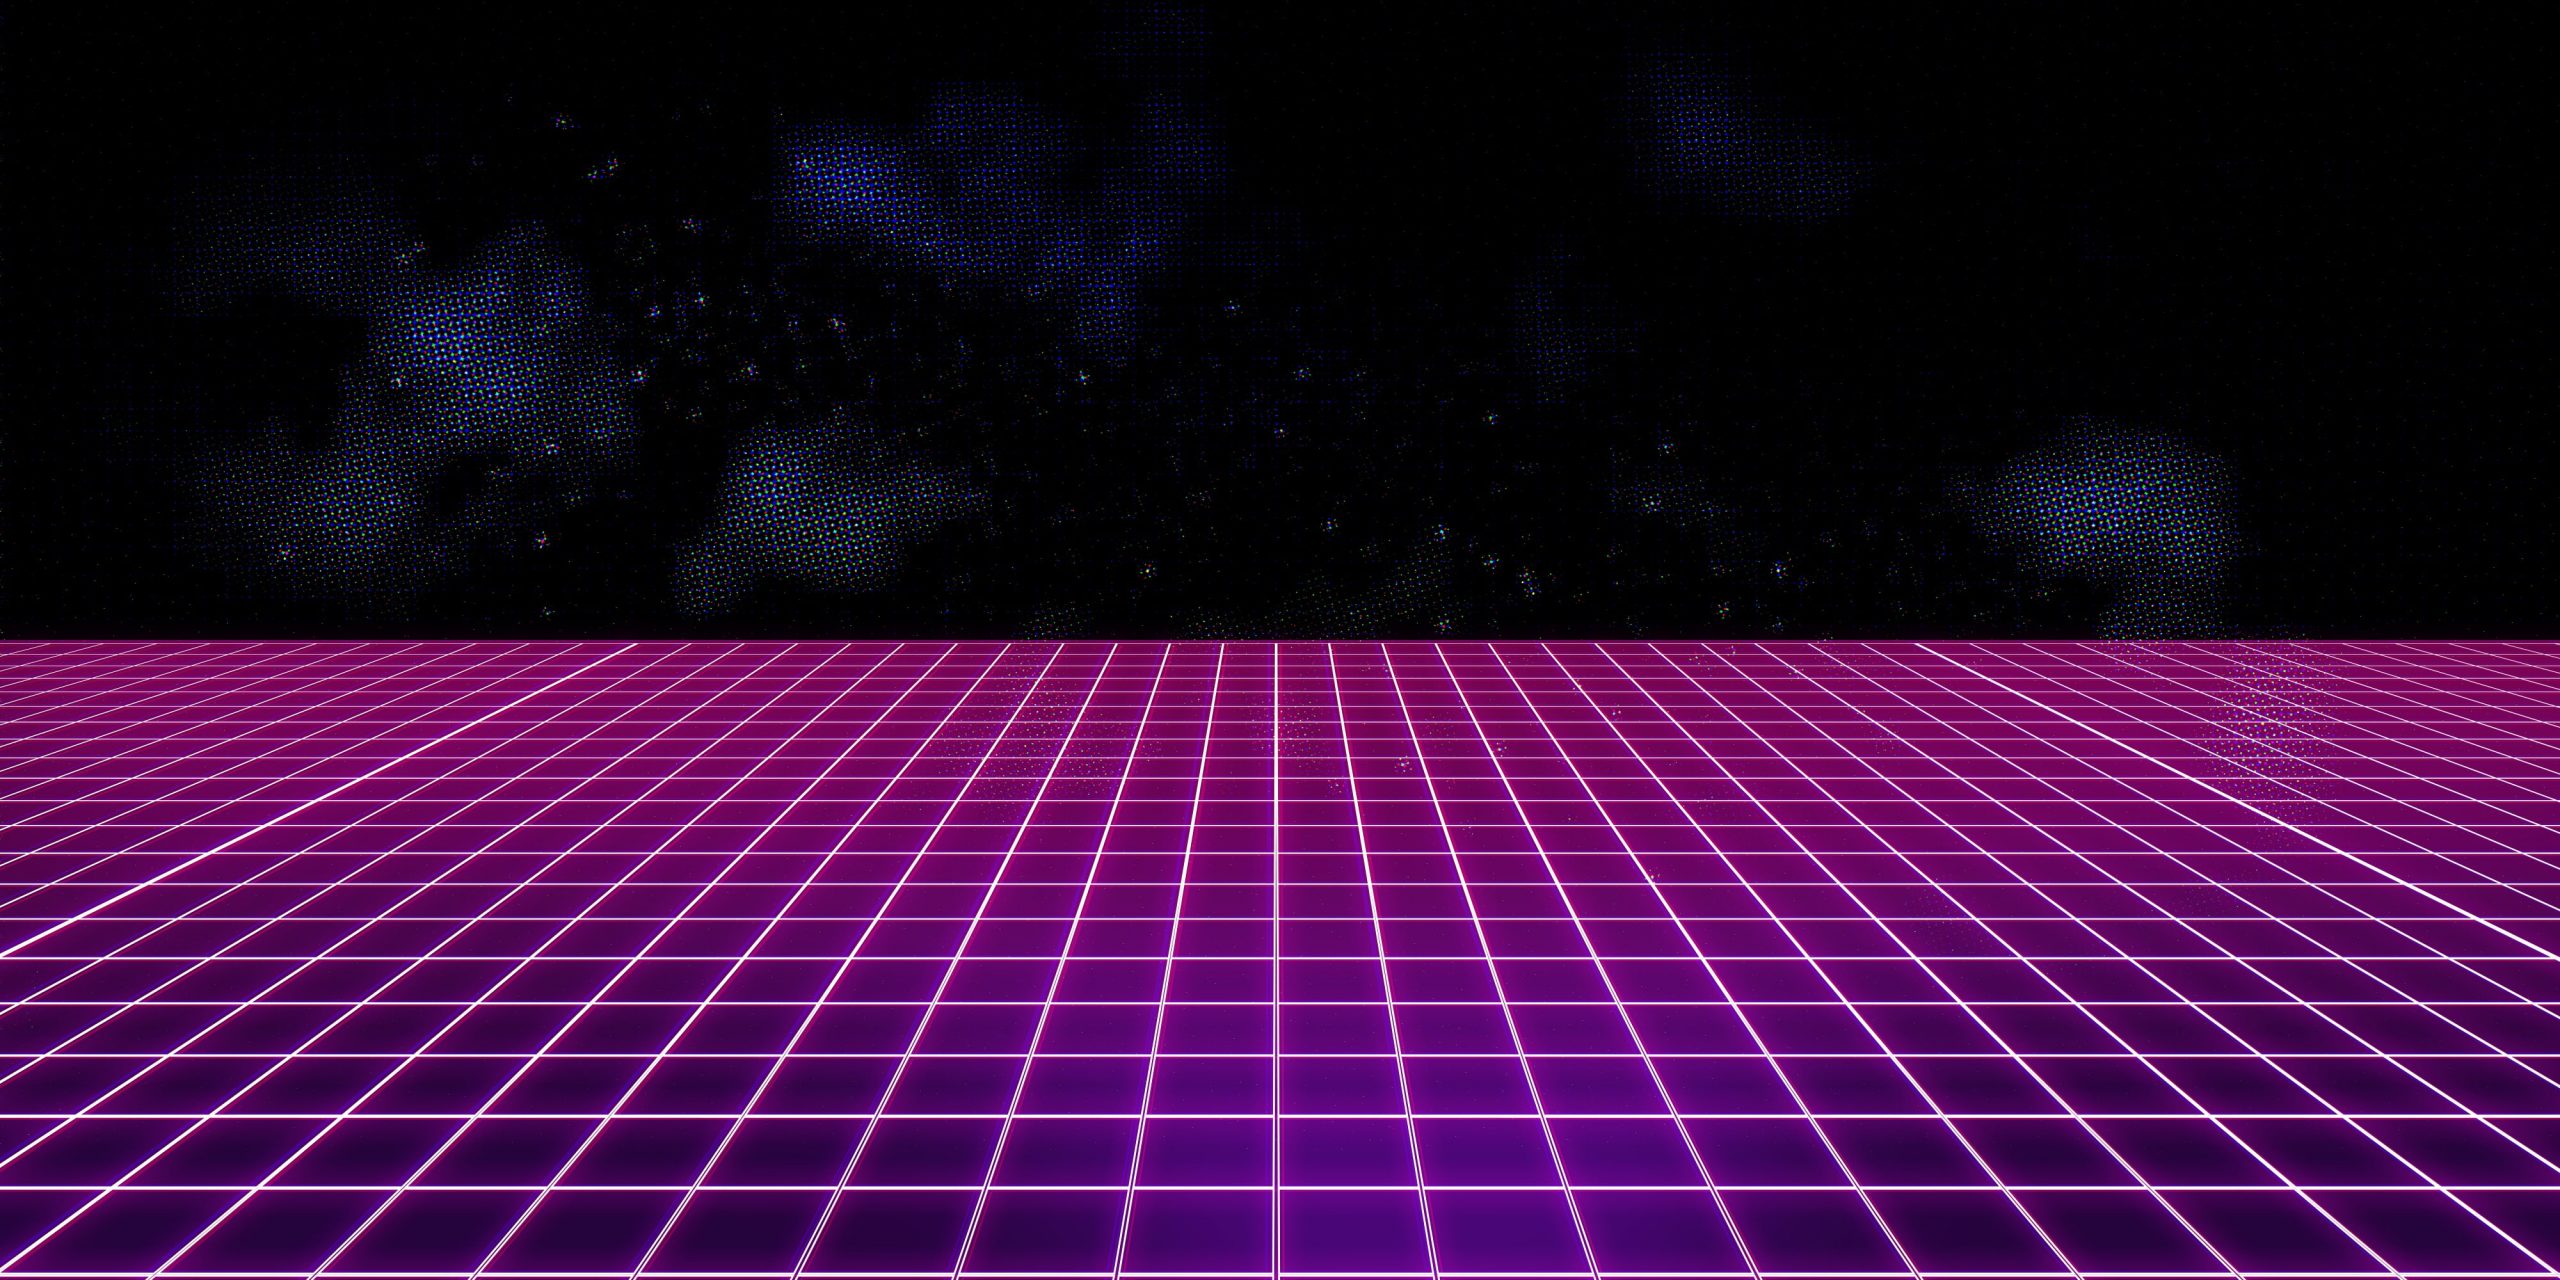 Music, Background, 80s wallpaper, Neon, VHS, 80's, Synth, Retrowave, Synthwave